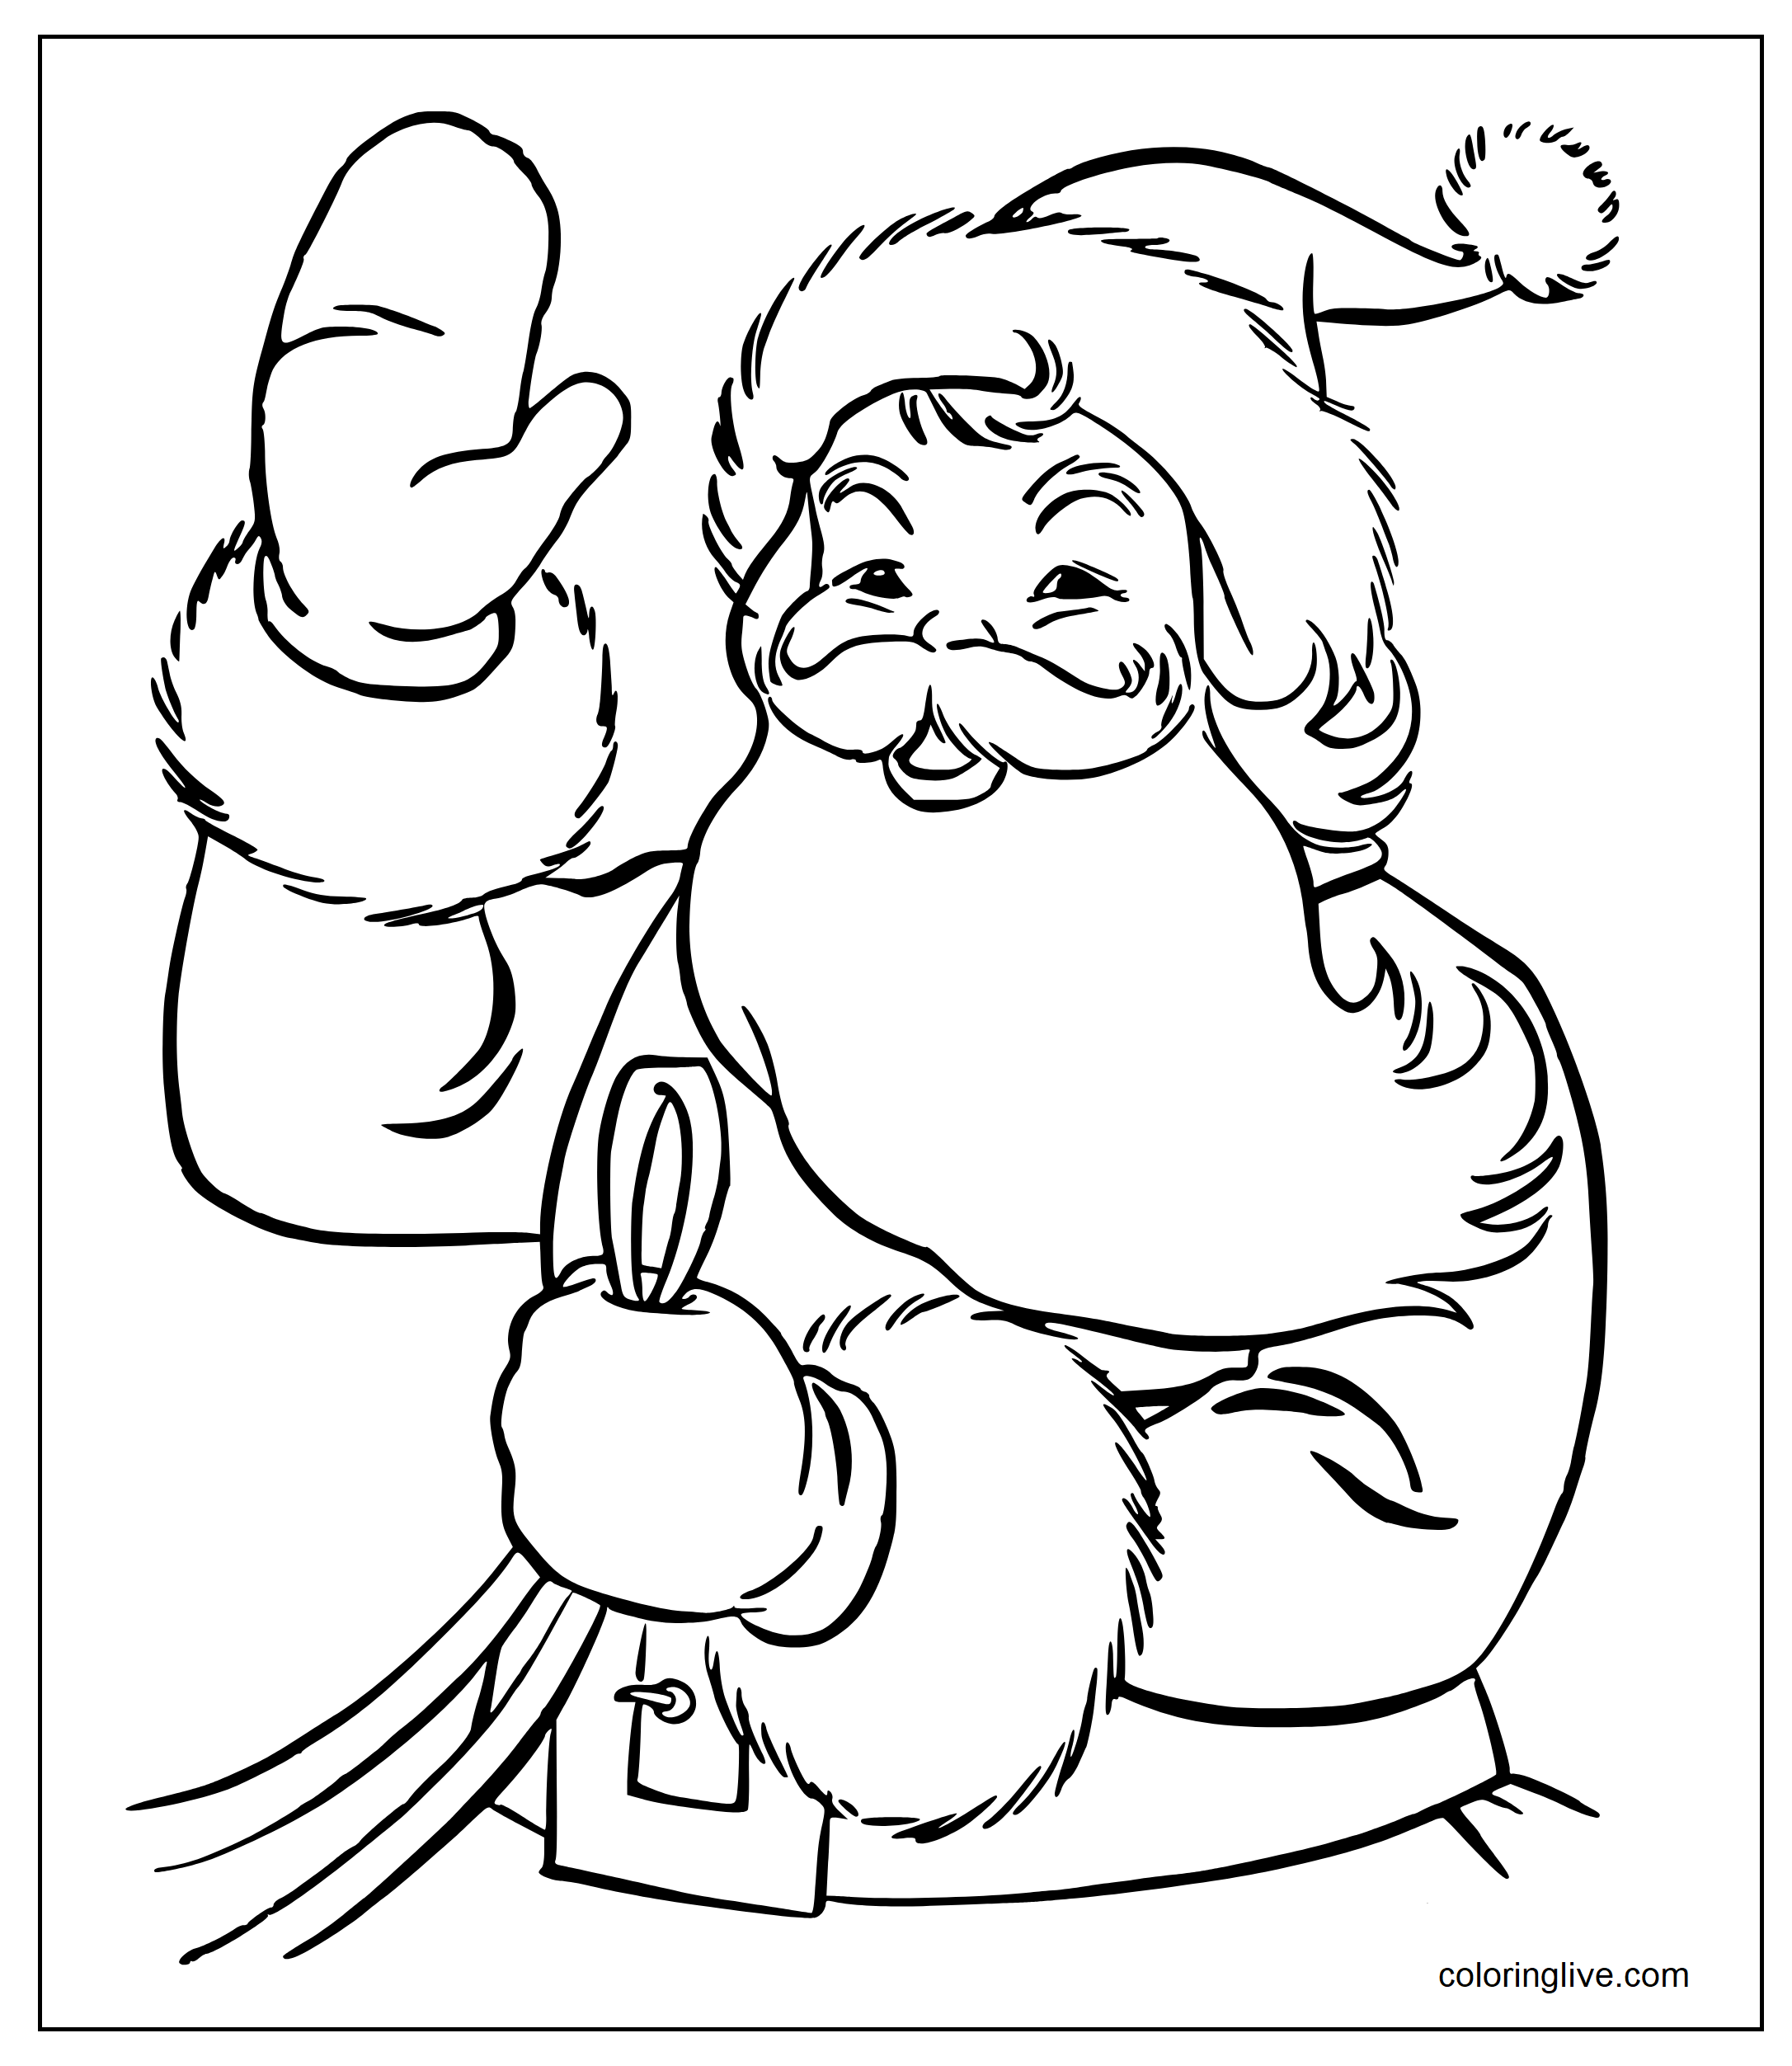 Printable santa black and white Coloring Page for kids.